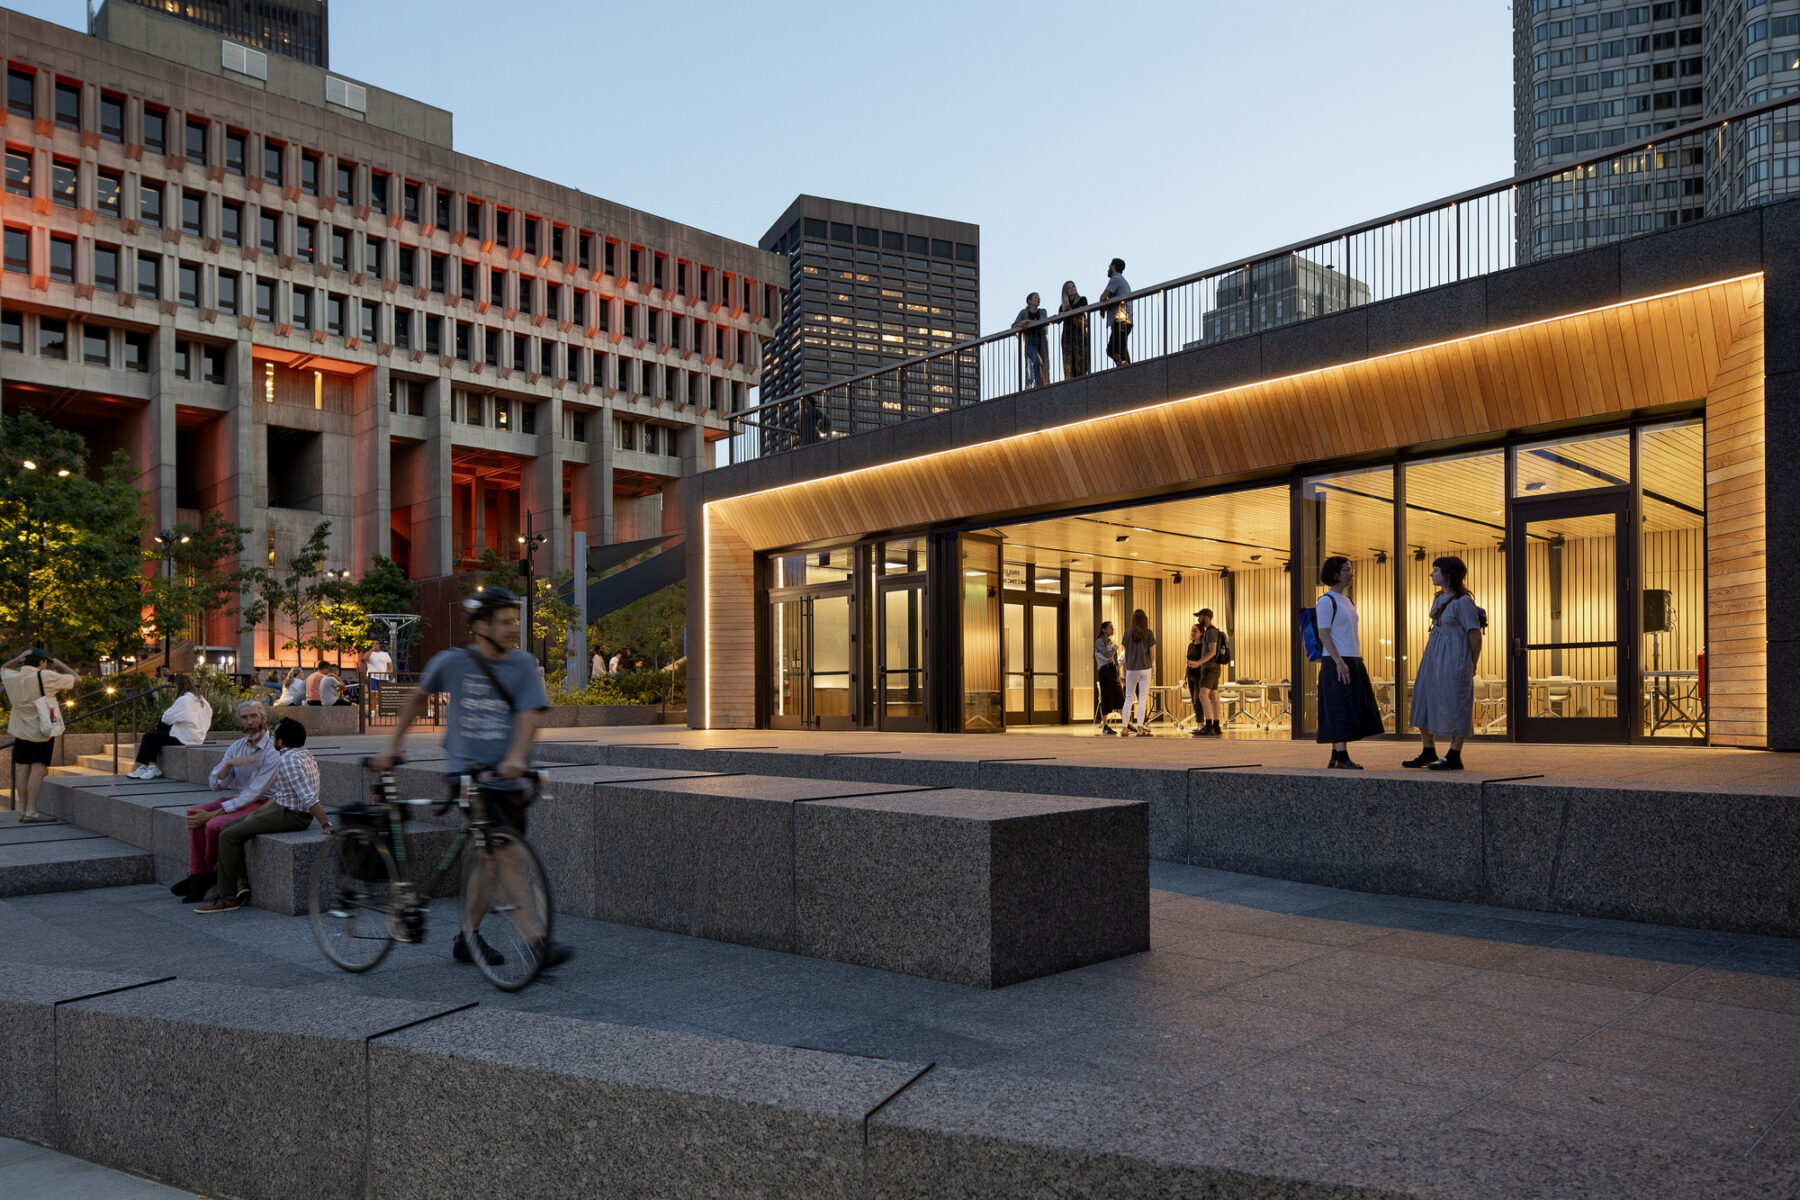 photograph of cyclist walking bike up ramp to venue space shot at dusk, with interior of venue lit up and City Hall plaza in background